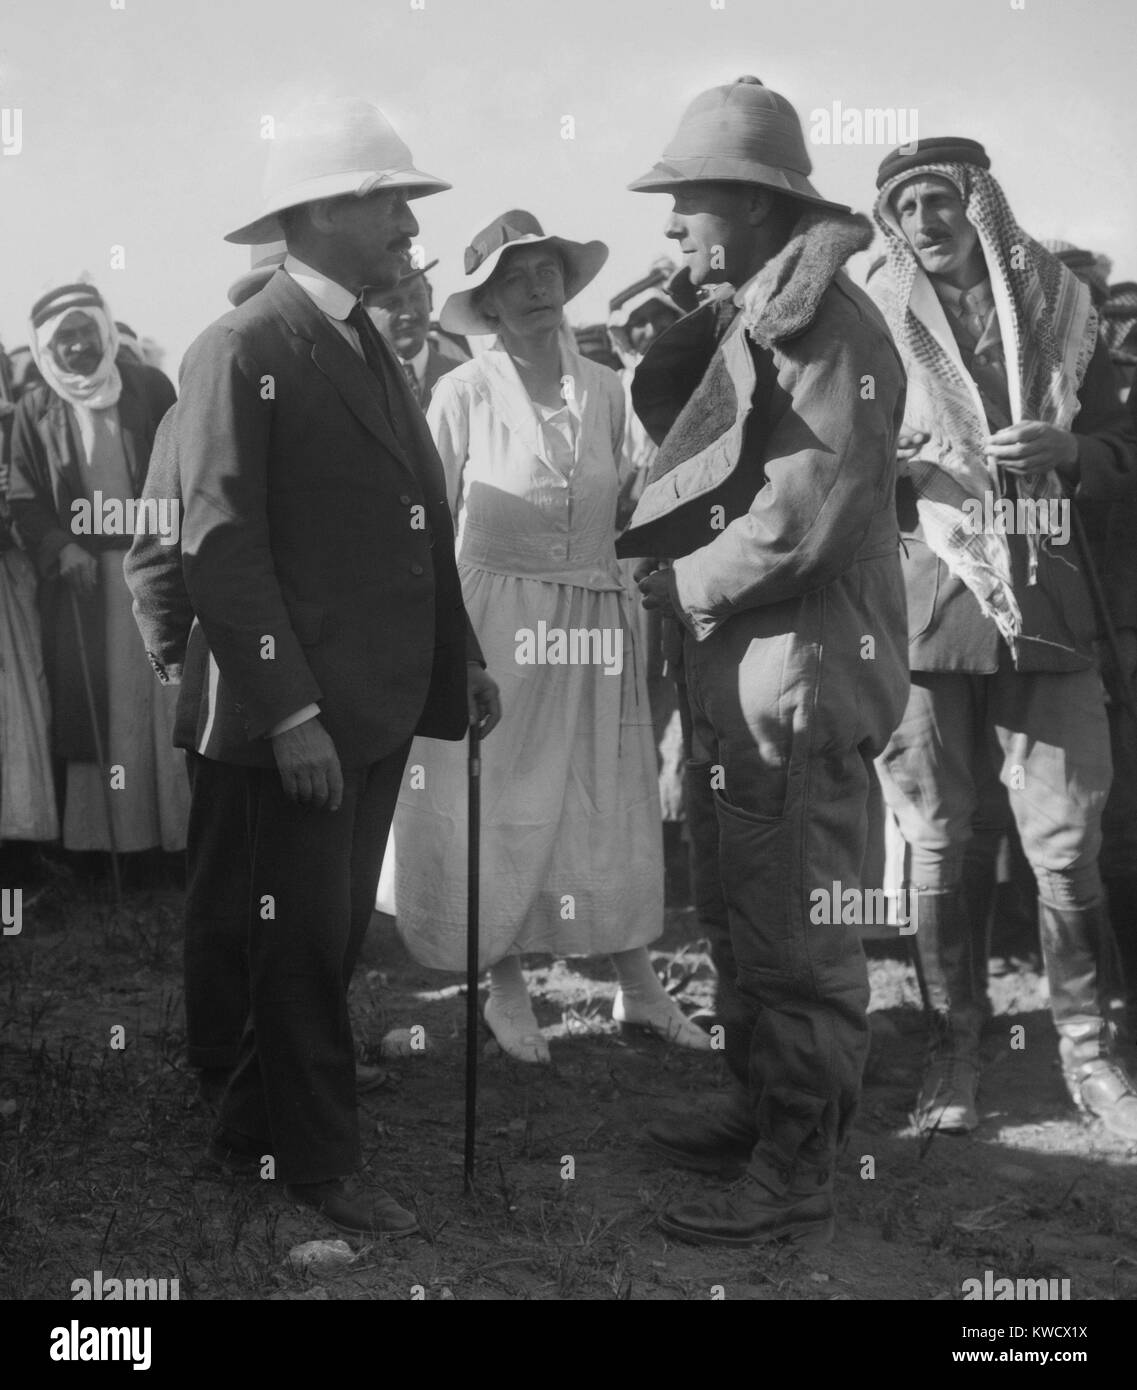 In center are, L-R: Sir Herbert Samuel, Gertrude Bell, and T.E. Lawrence, in April 1921. Samuel was British High Commissioner of Palestine; Bell was a politically influential linguist and Arabist; and Col. Lawrence, coordinated between British and Arab fo (BSLOC 2017 1 95) Stock Photo